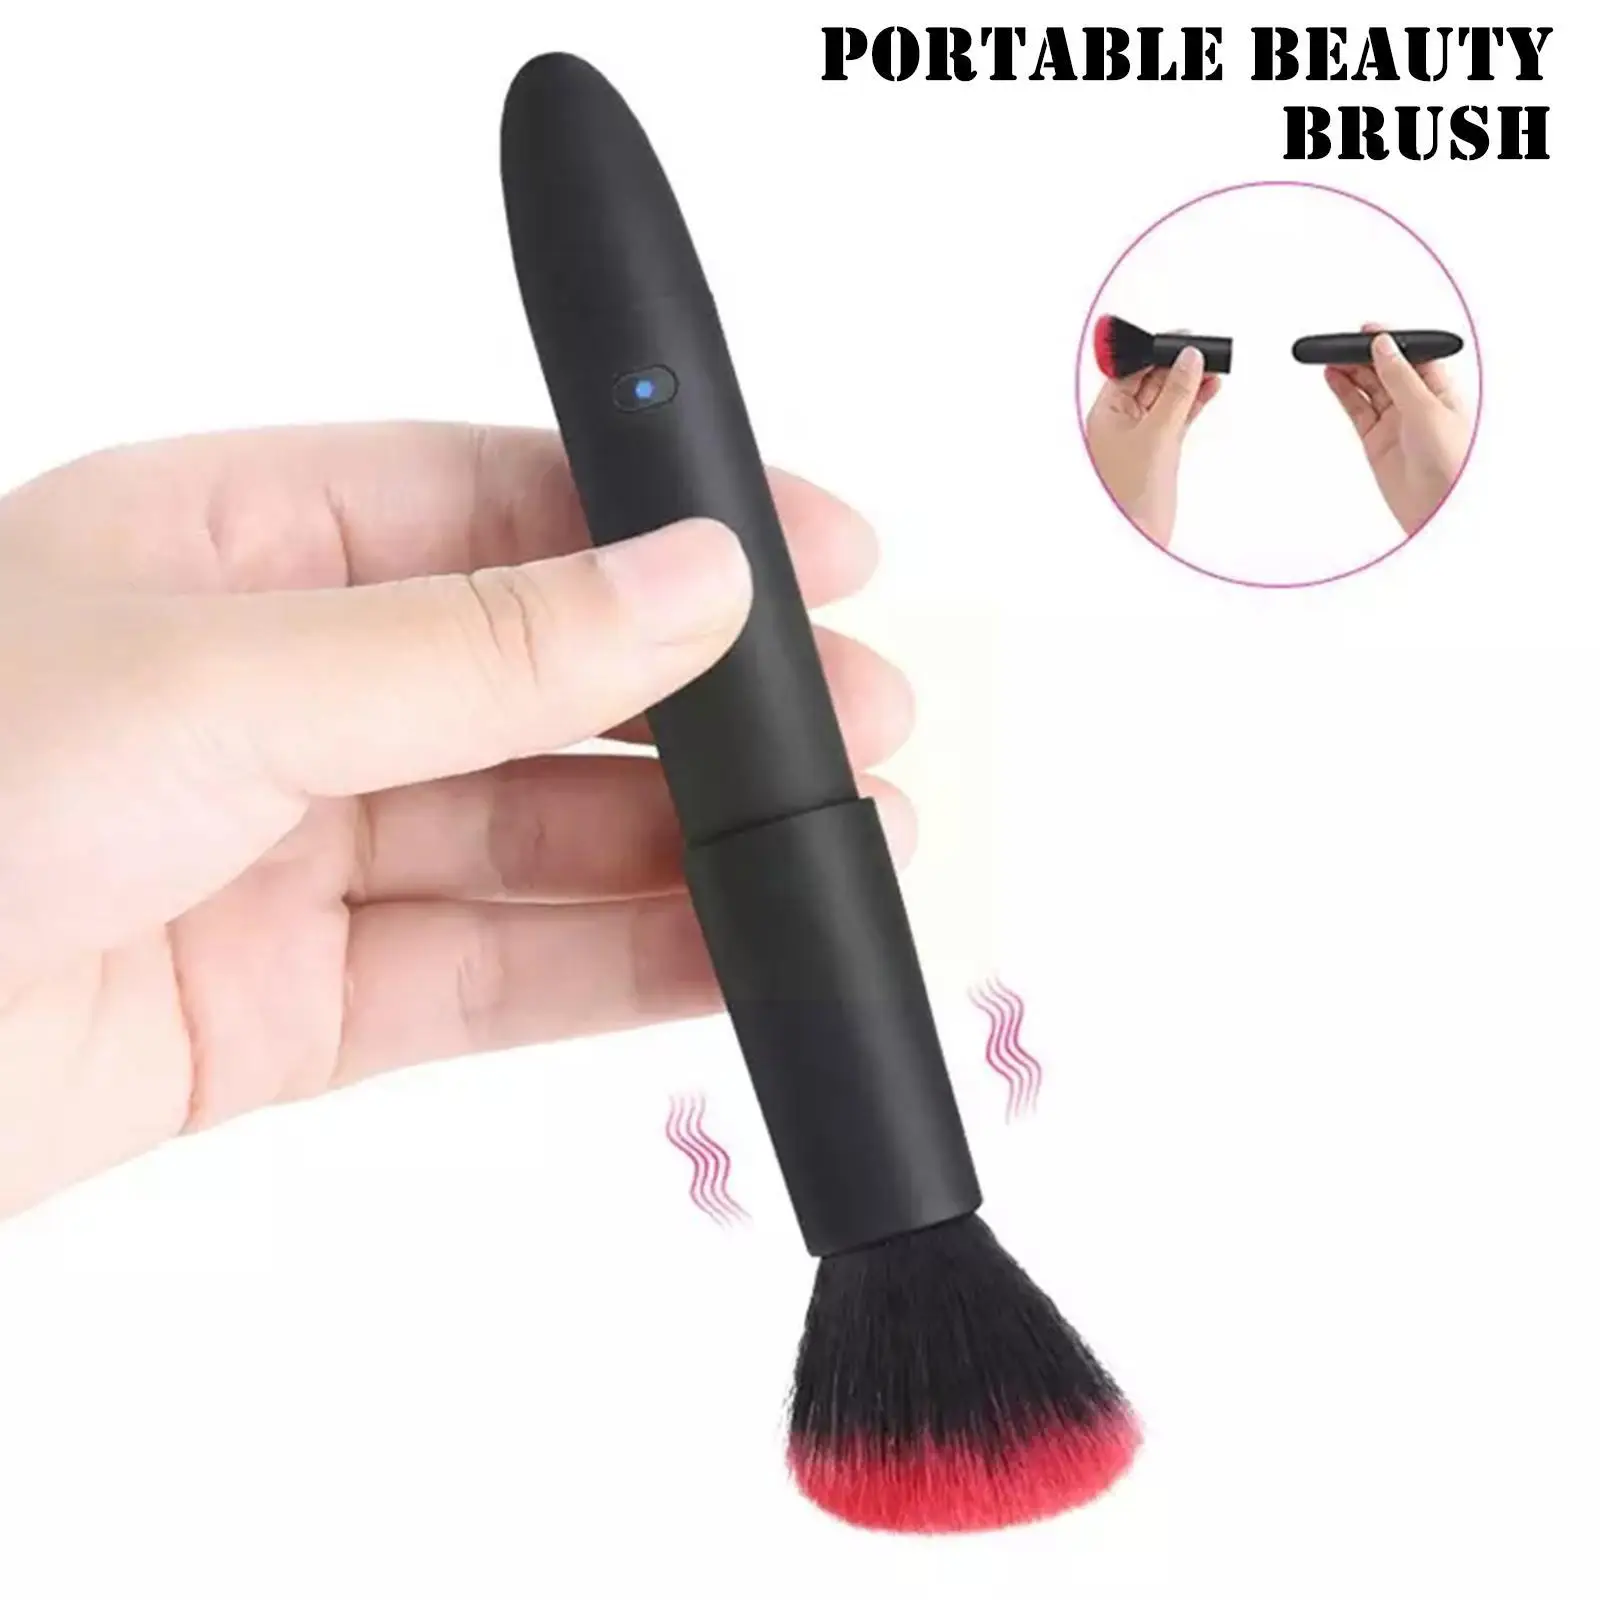 

Portable Beauty Brush USB Charge Electric Makeup Foundation Tools Black Brush Cosmetics Blending Concealer